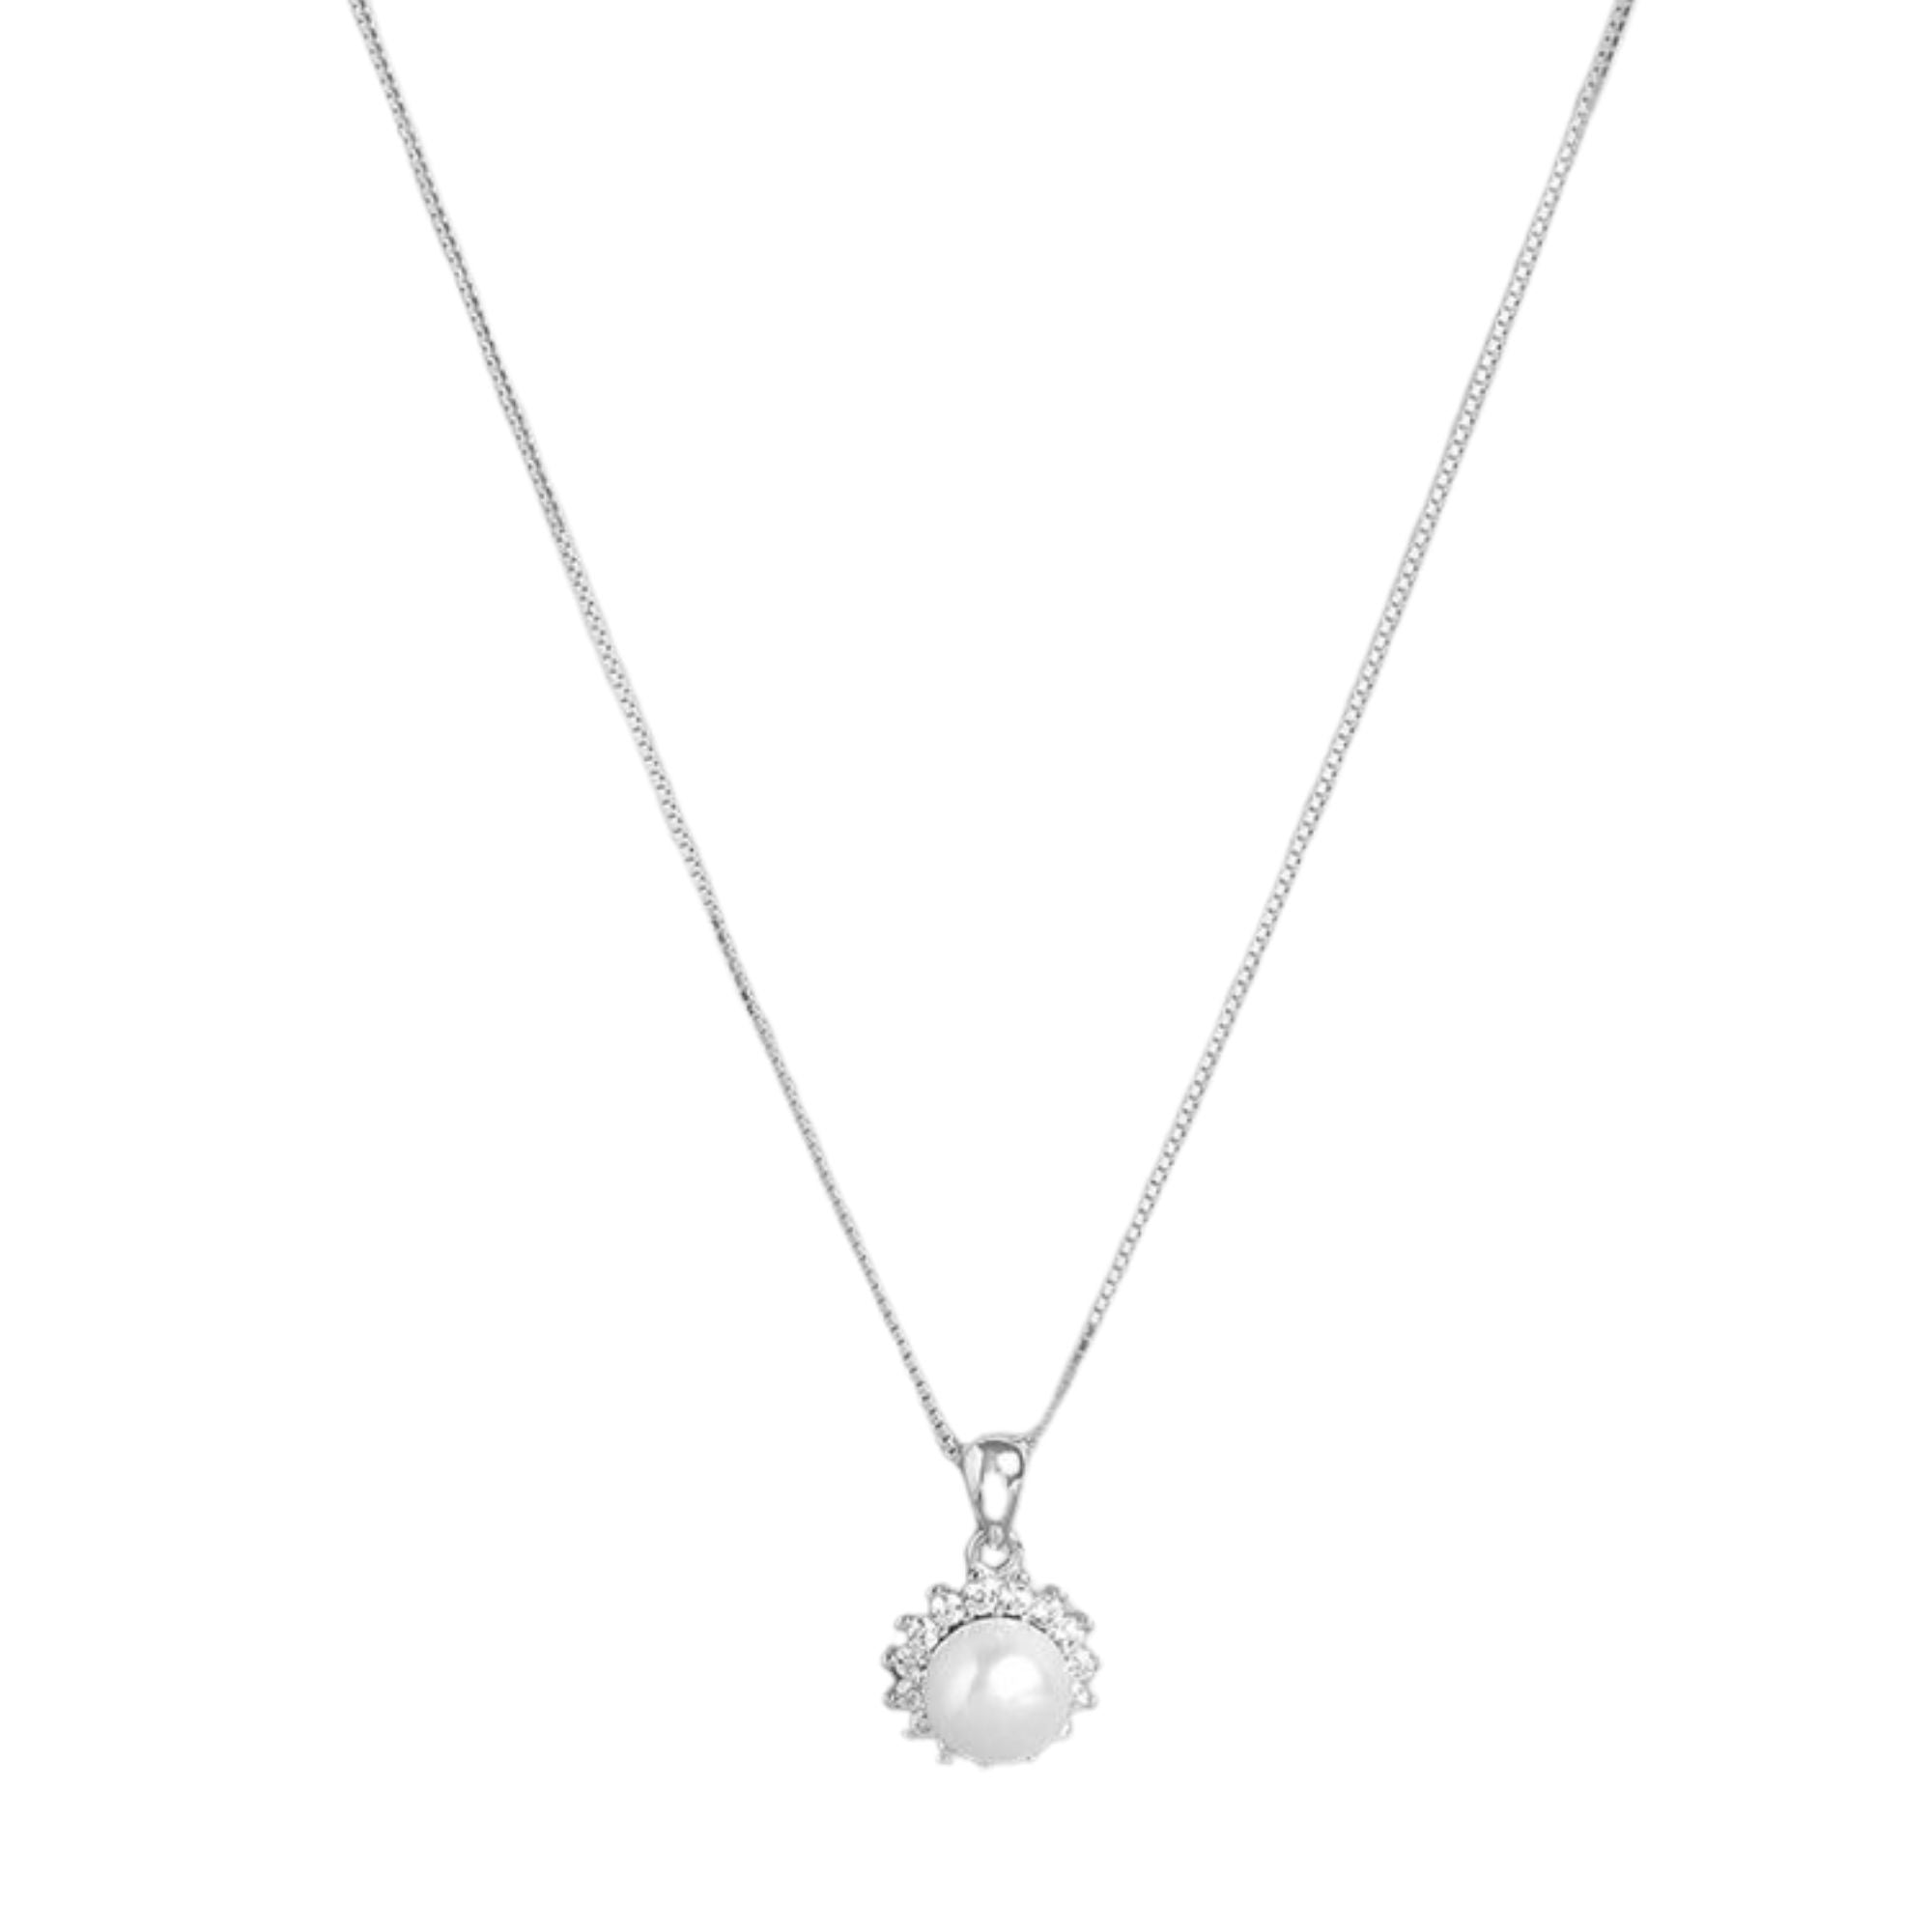 Twinkling Grace: Cubic Zirconia Rhodium Plated 925 Sterling Silver Pendent with Chain